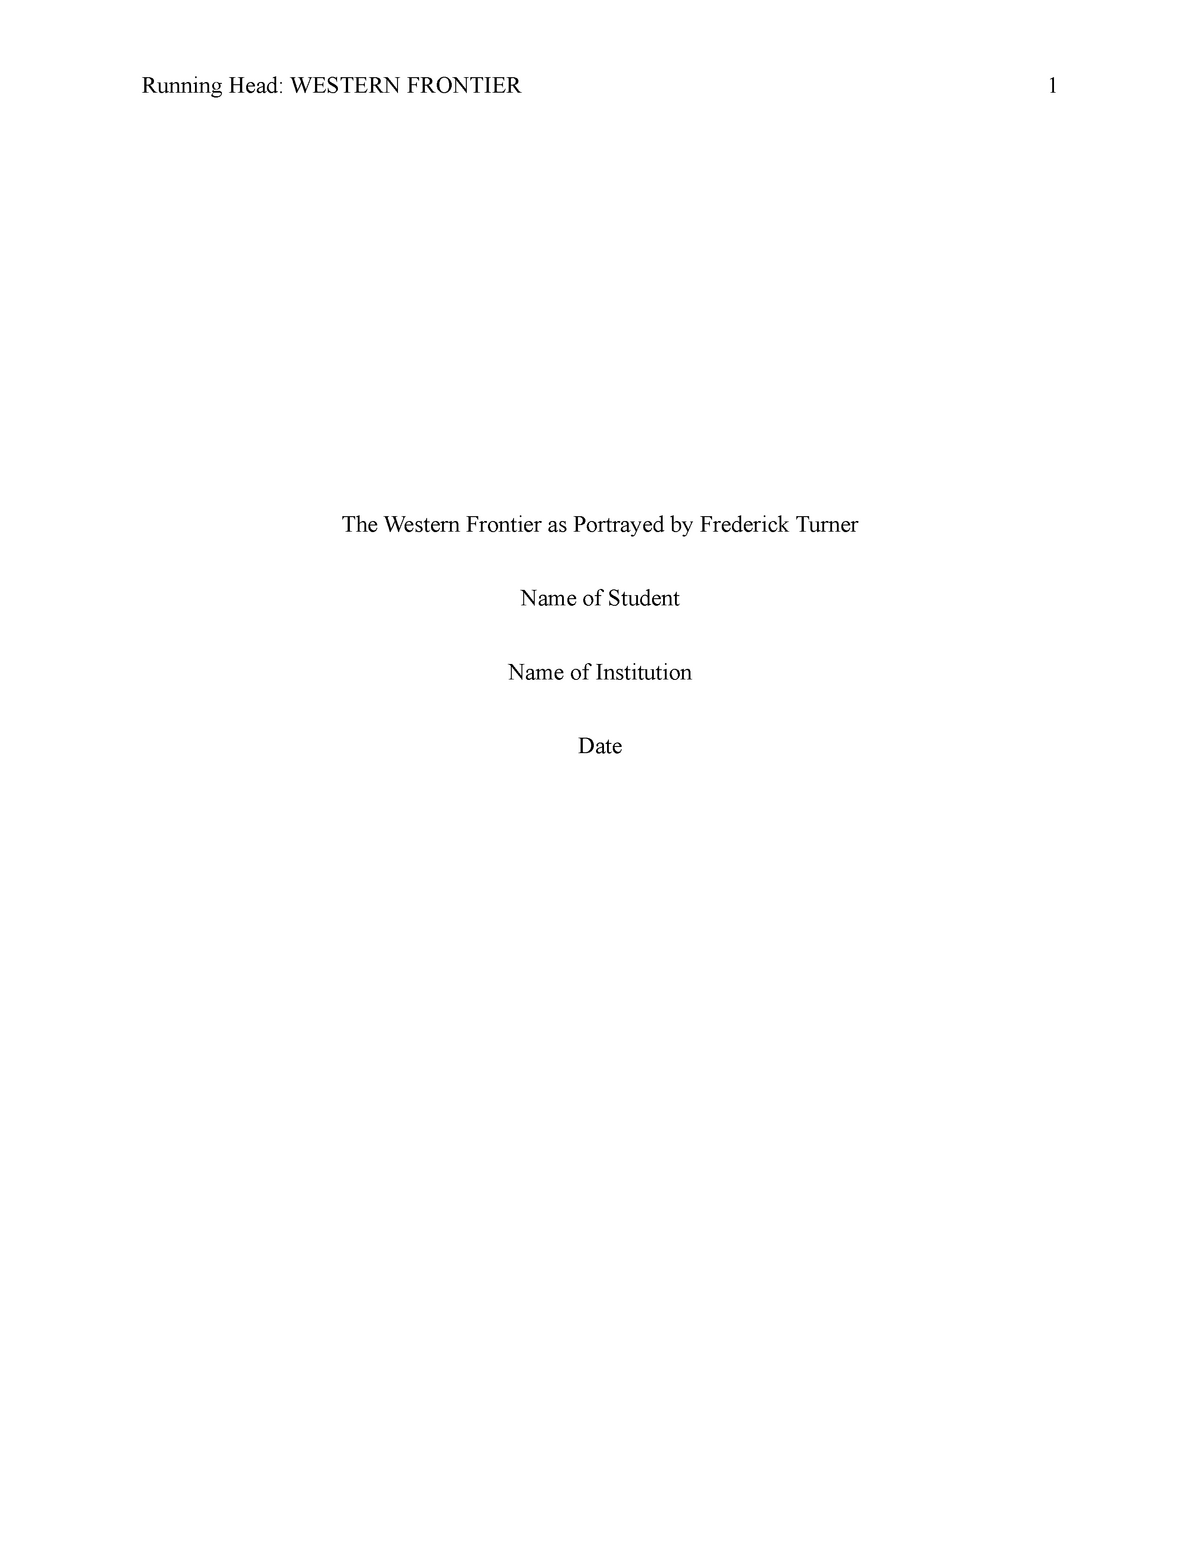 turner frontier thesis pdf